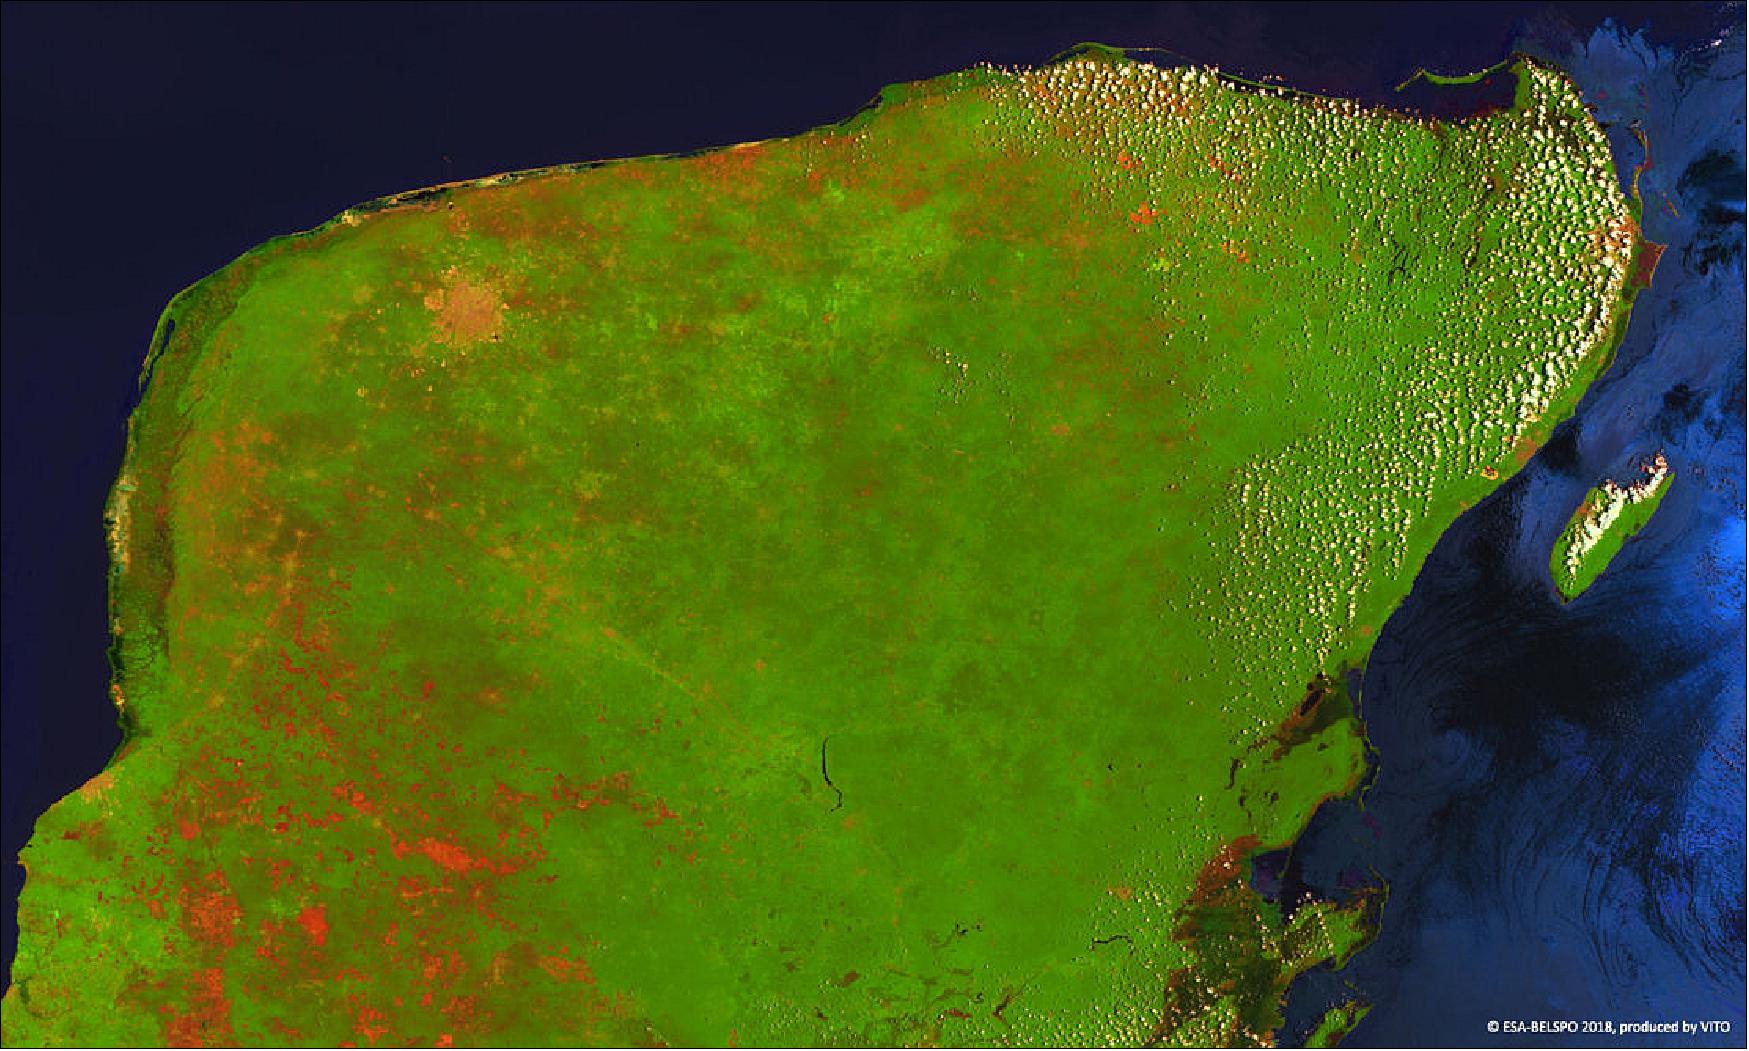 Figure 30: This 100 m resolution image of the Yucatán peninsula was acquired with PROBA-V on 23 July 2018 (image credit: ESA/Belspo – produced by VITO)